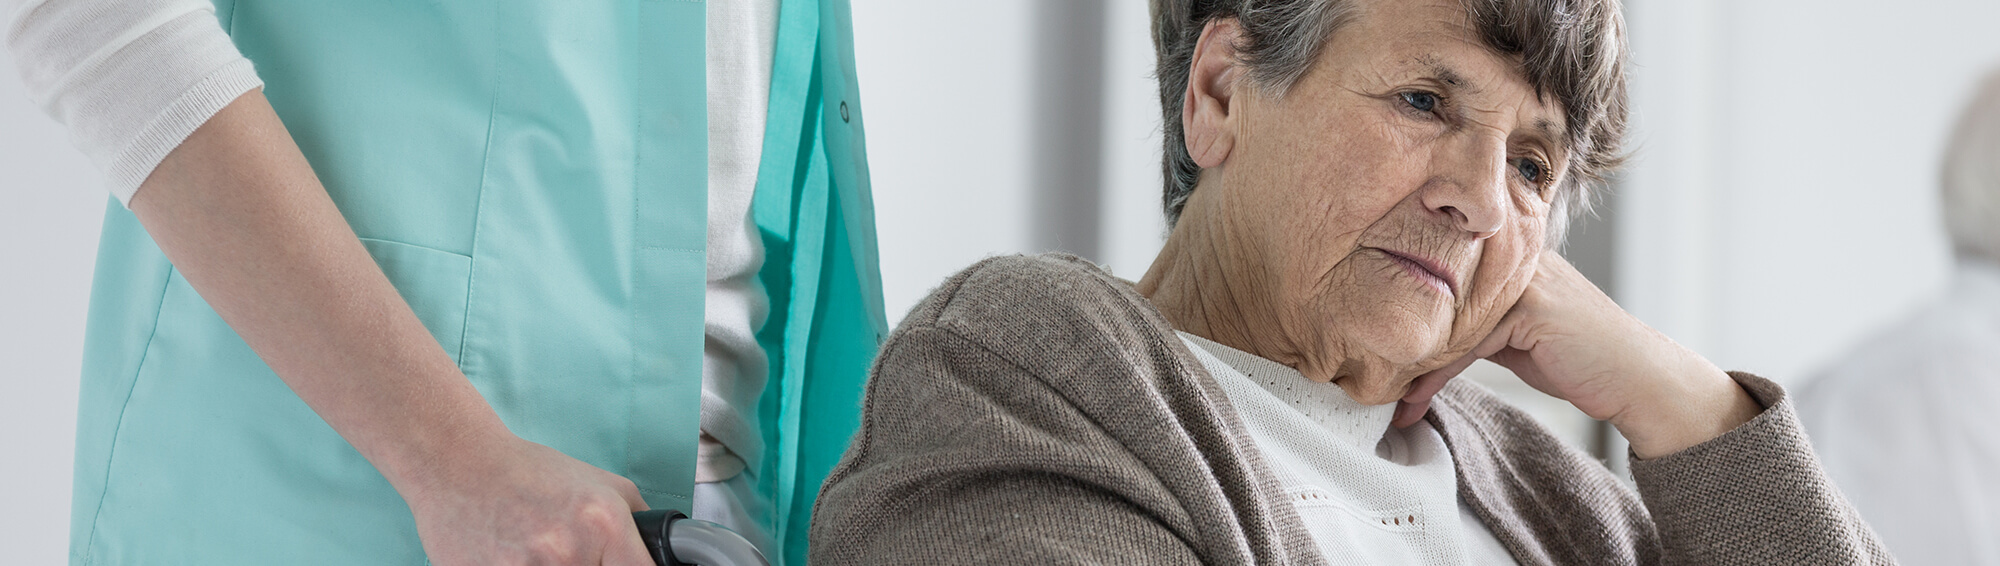 Call a Lawyer Right Away if You Suspect Nursing Home Abuse